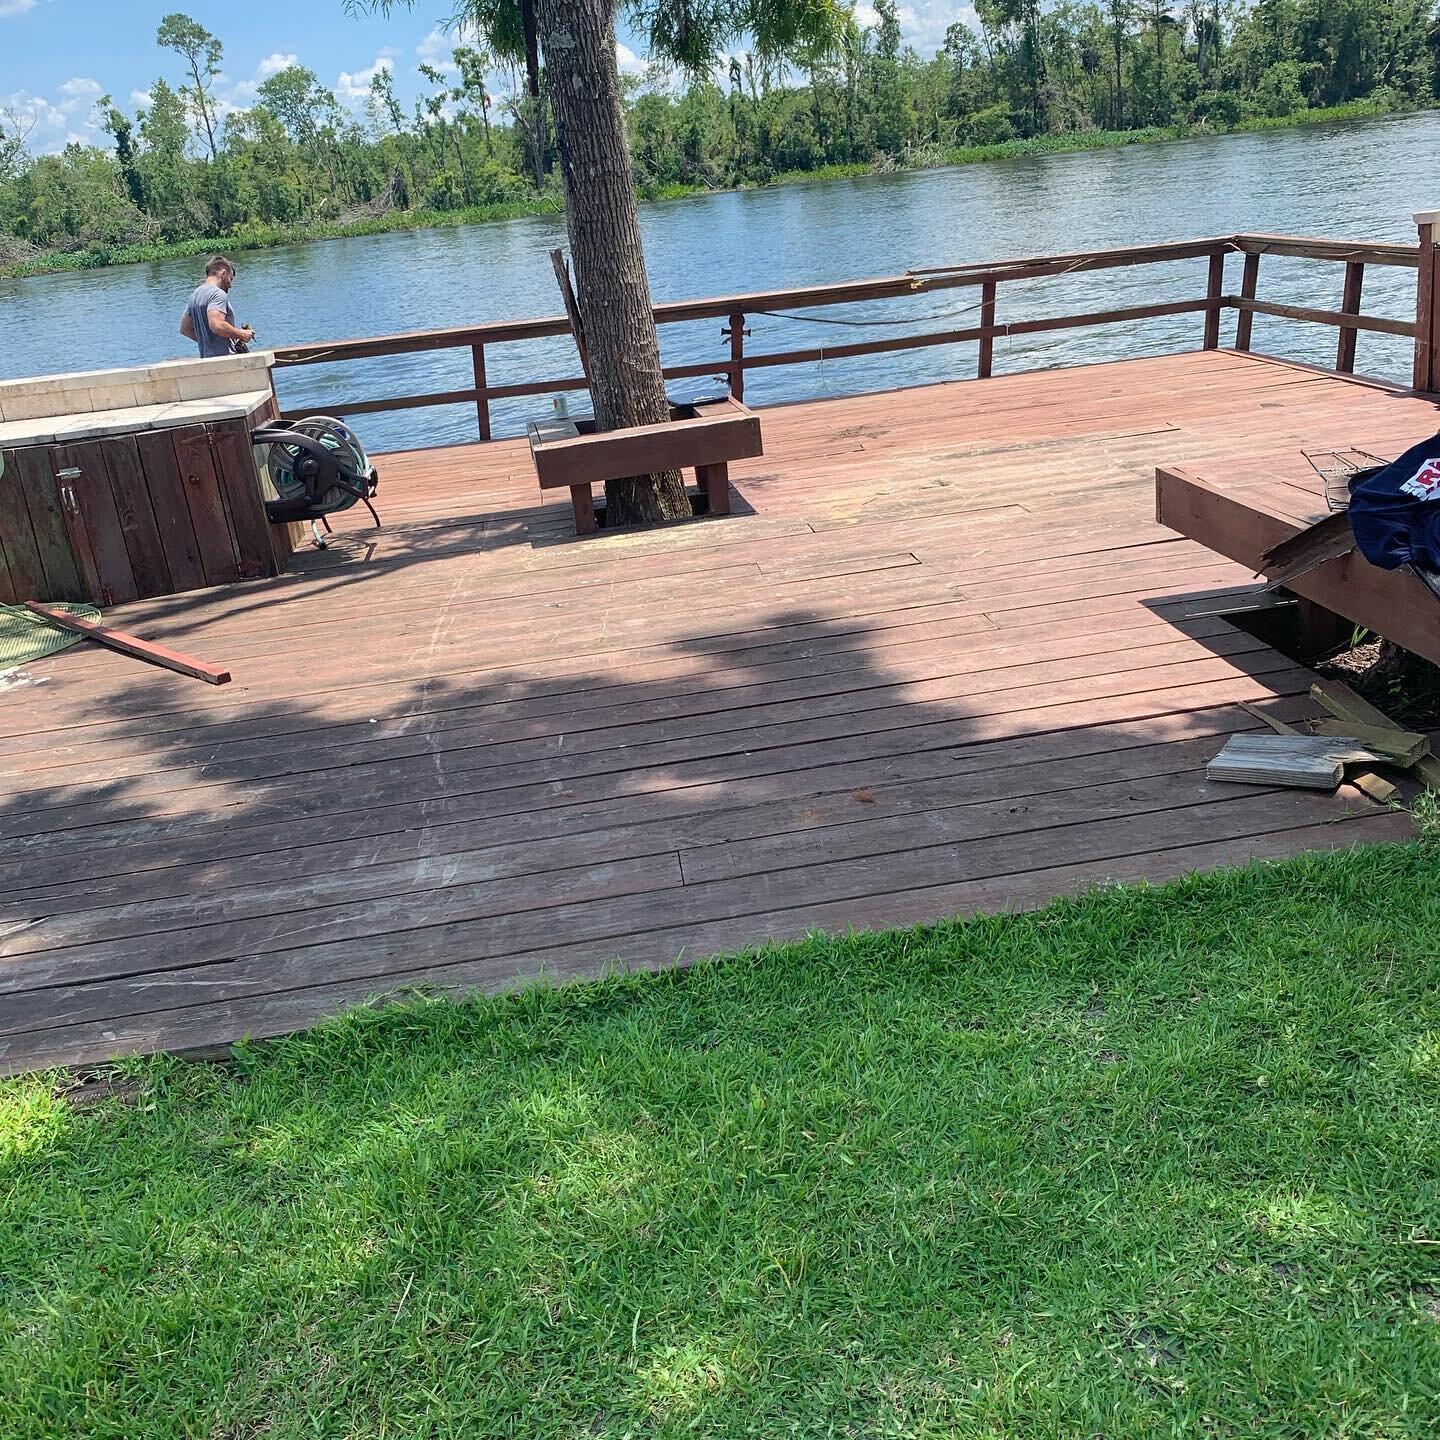 Our team is starting a re-do from a dock that was damaged from the tornado. Be sure to follow along on our stories and highlight reel. 
#trusttheprocess #vfwindows #vfdoors #veterans #familyowned #monckscorner #hurricane #rebuilding #tornado #damaged